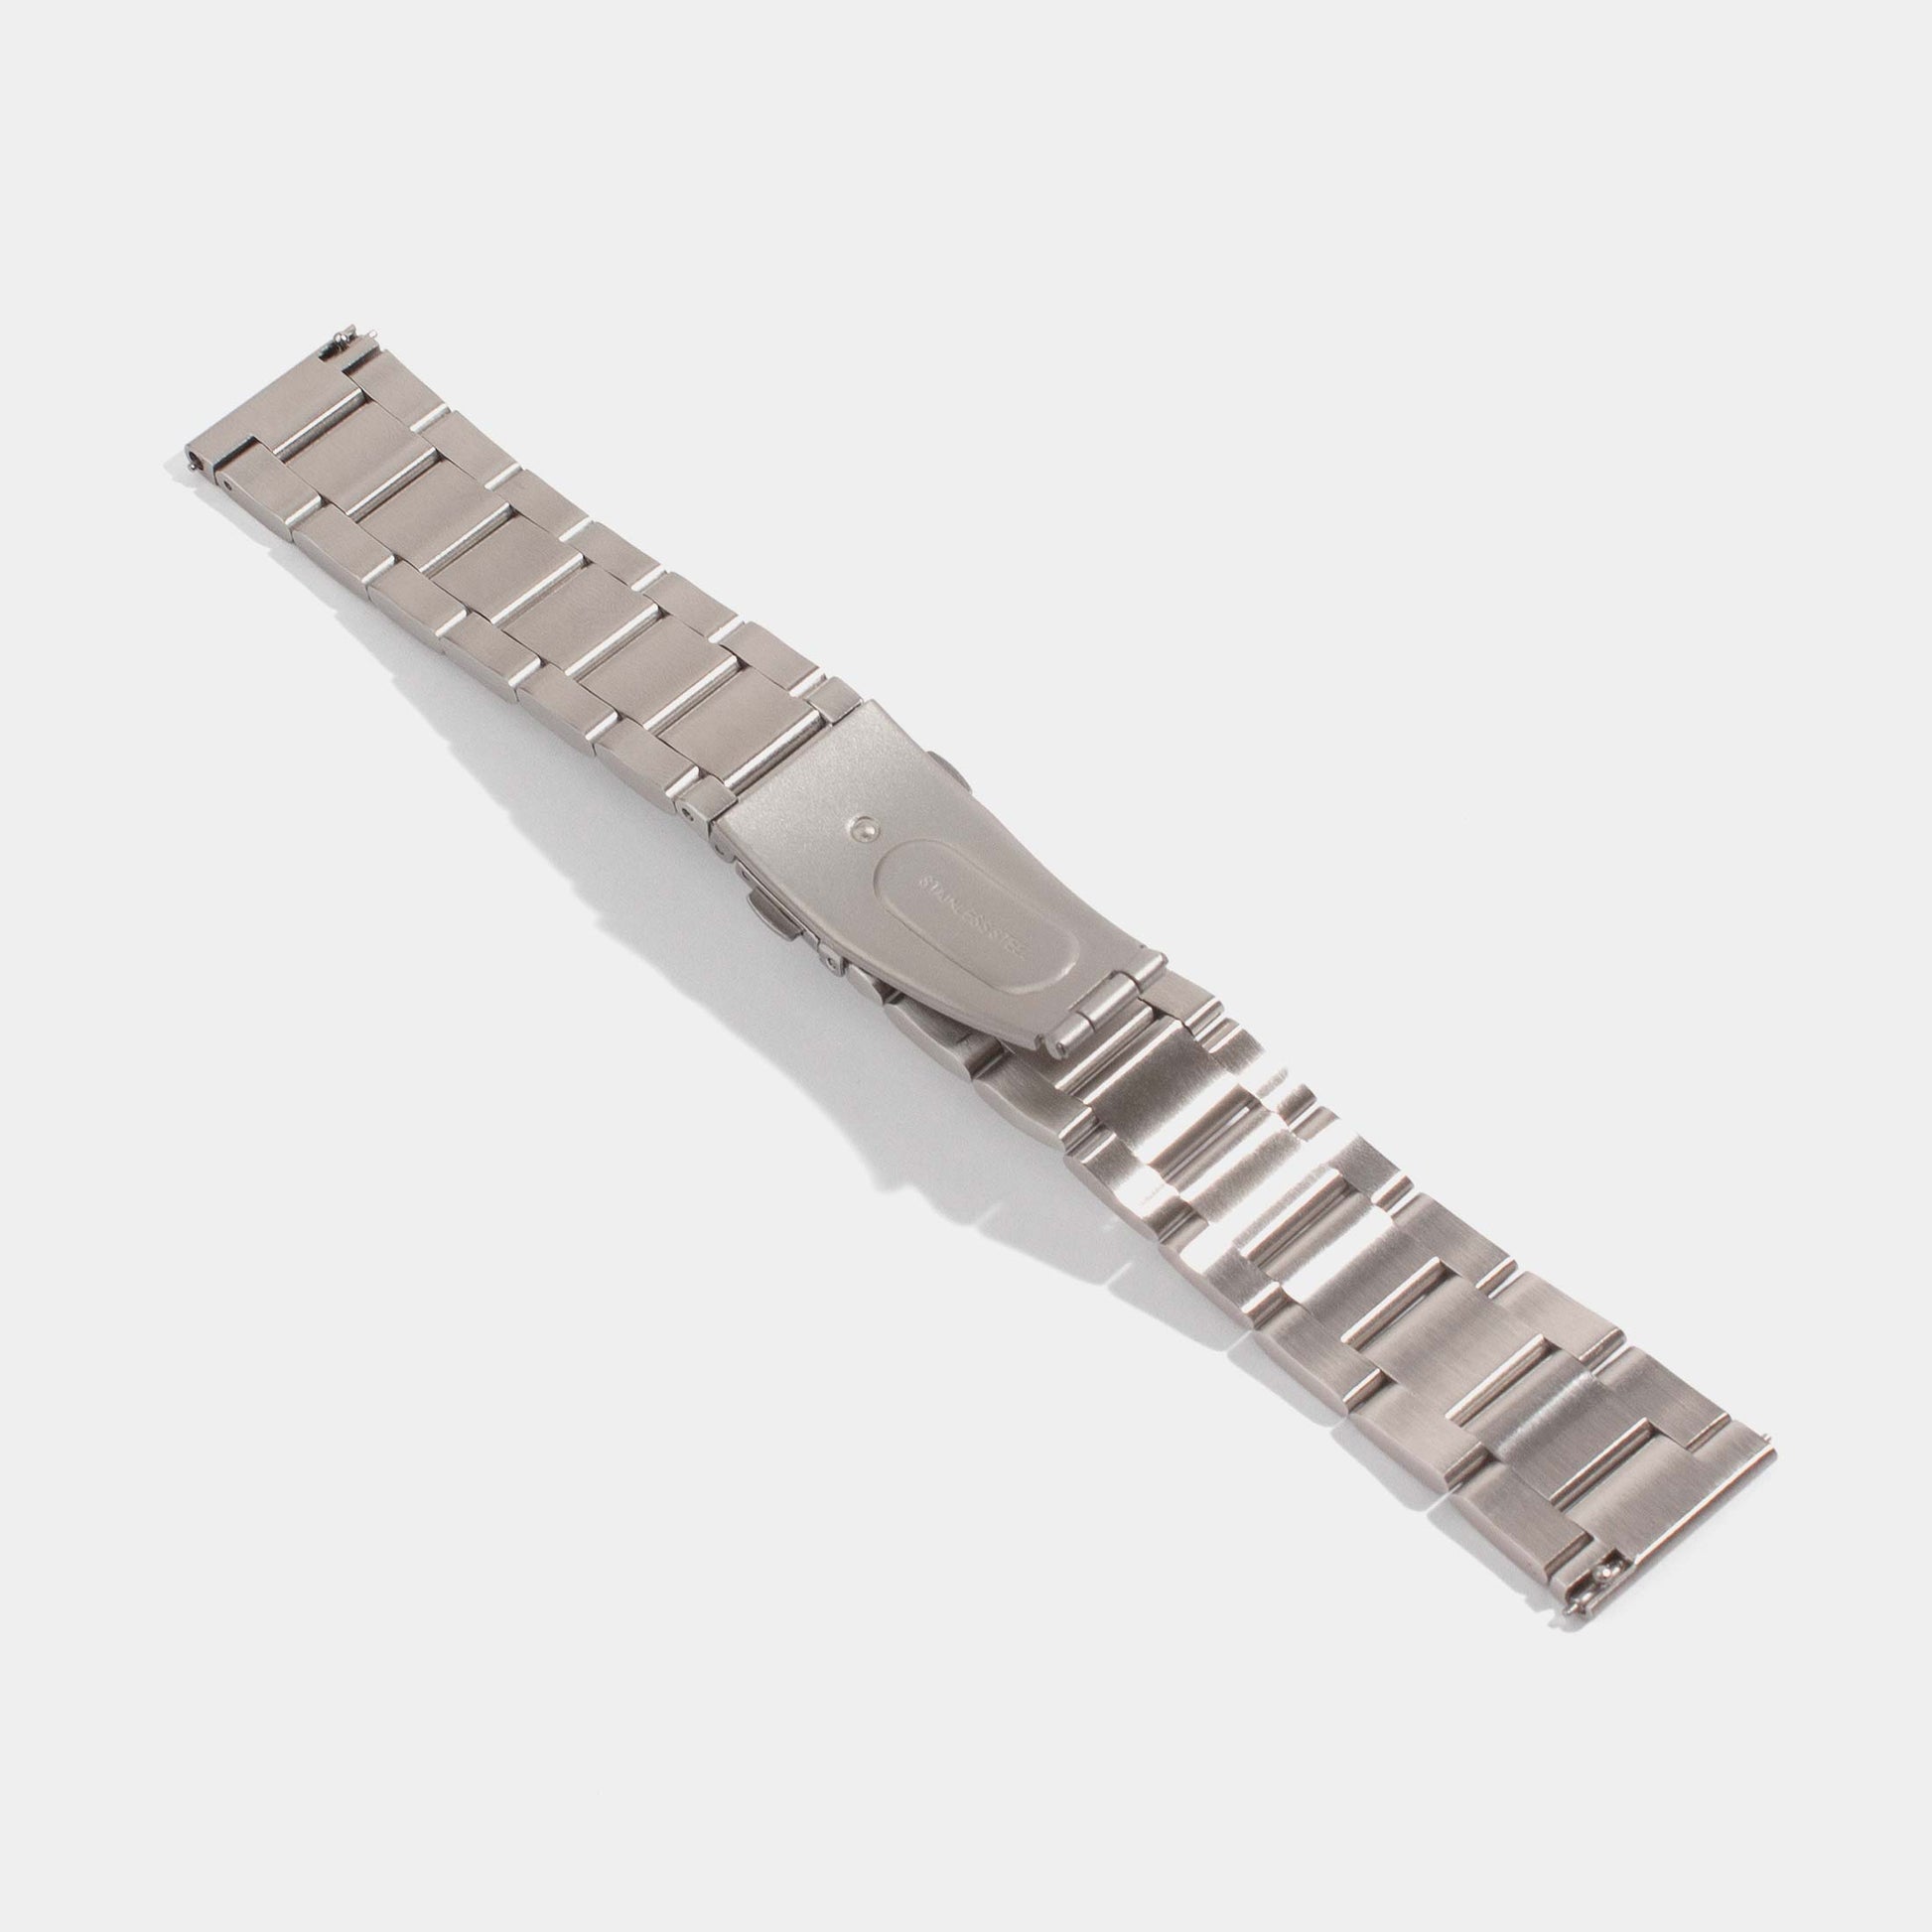 Samsung stainless steel watch strap-3-Links stainless steel watch band-Back